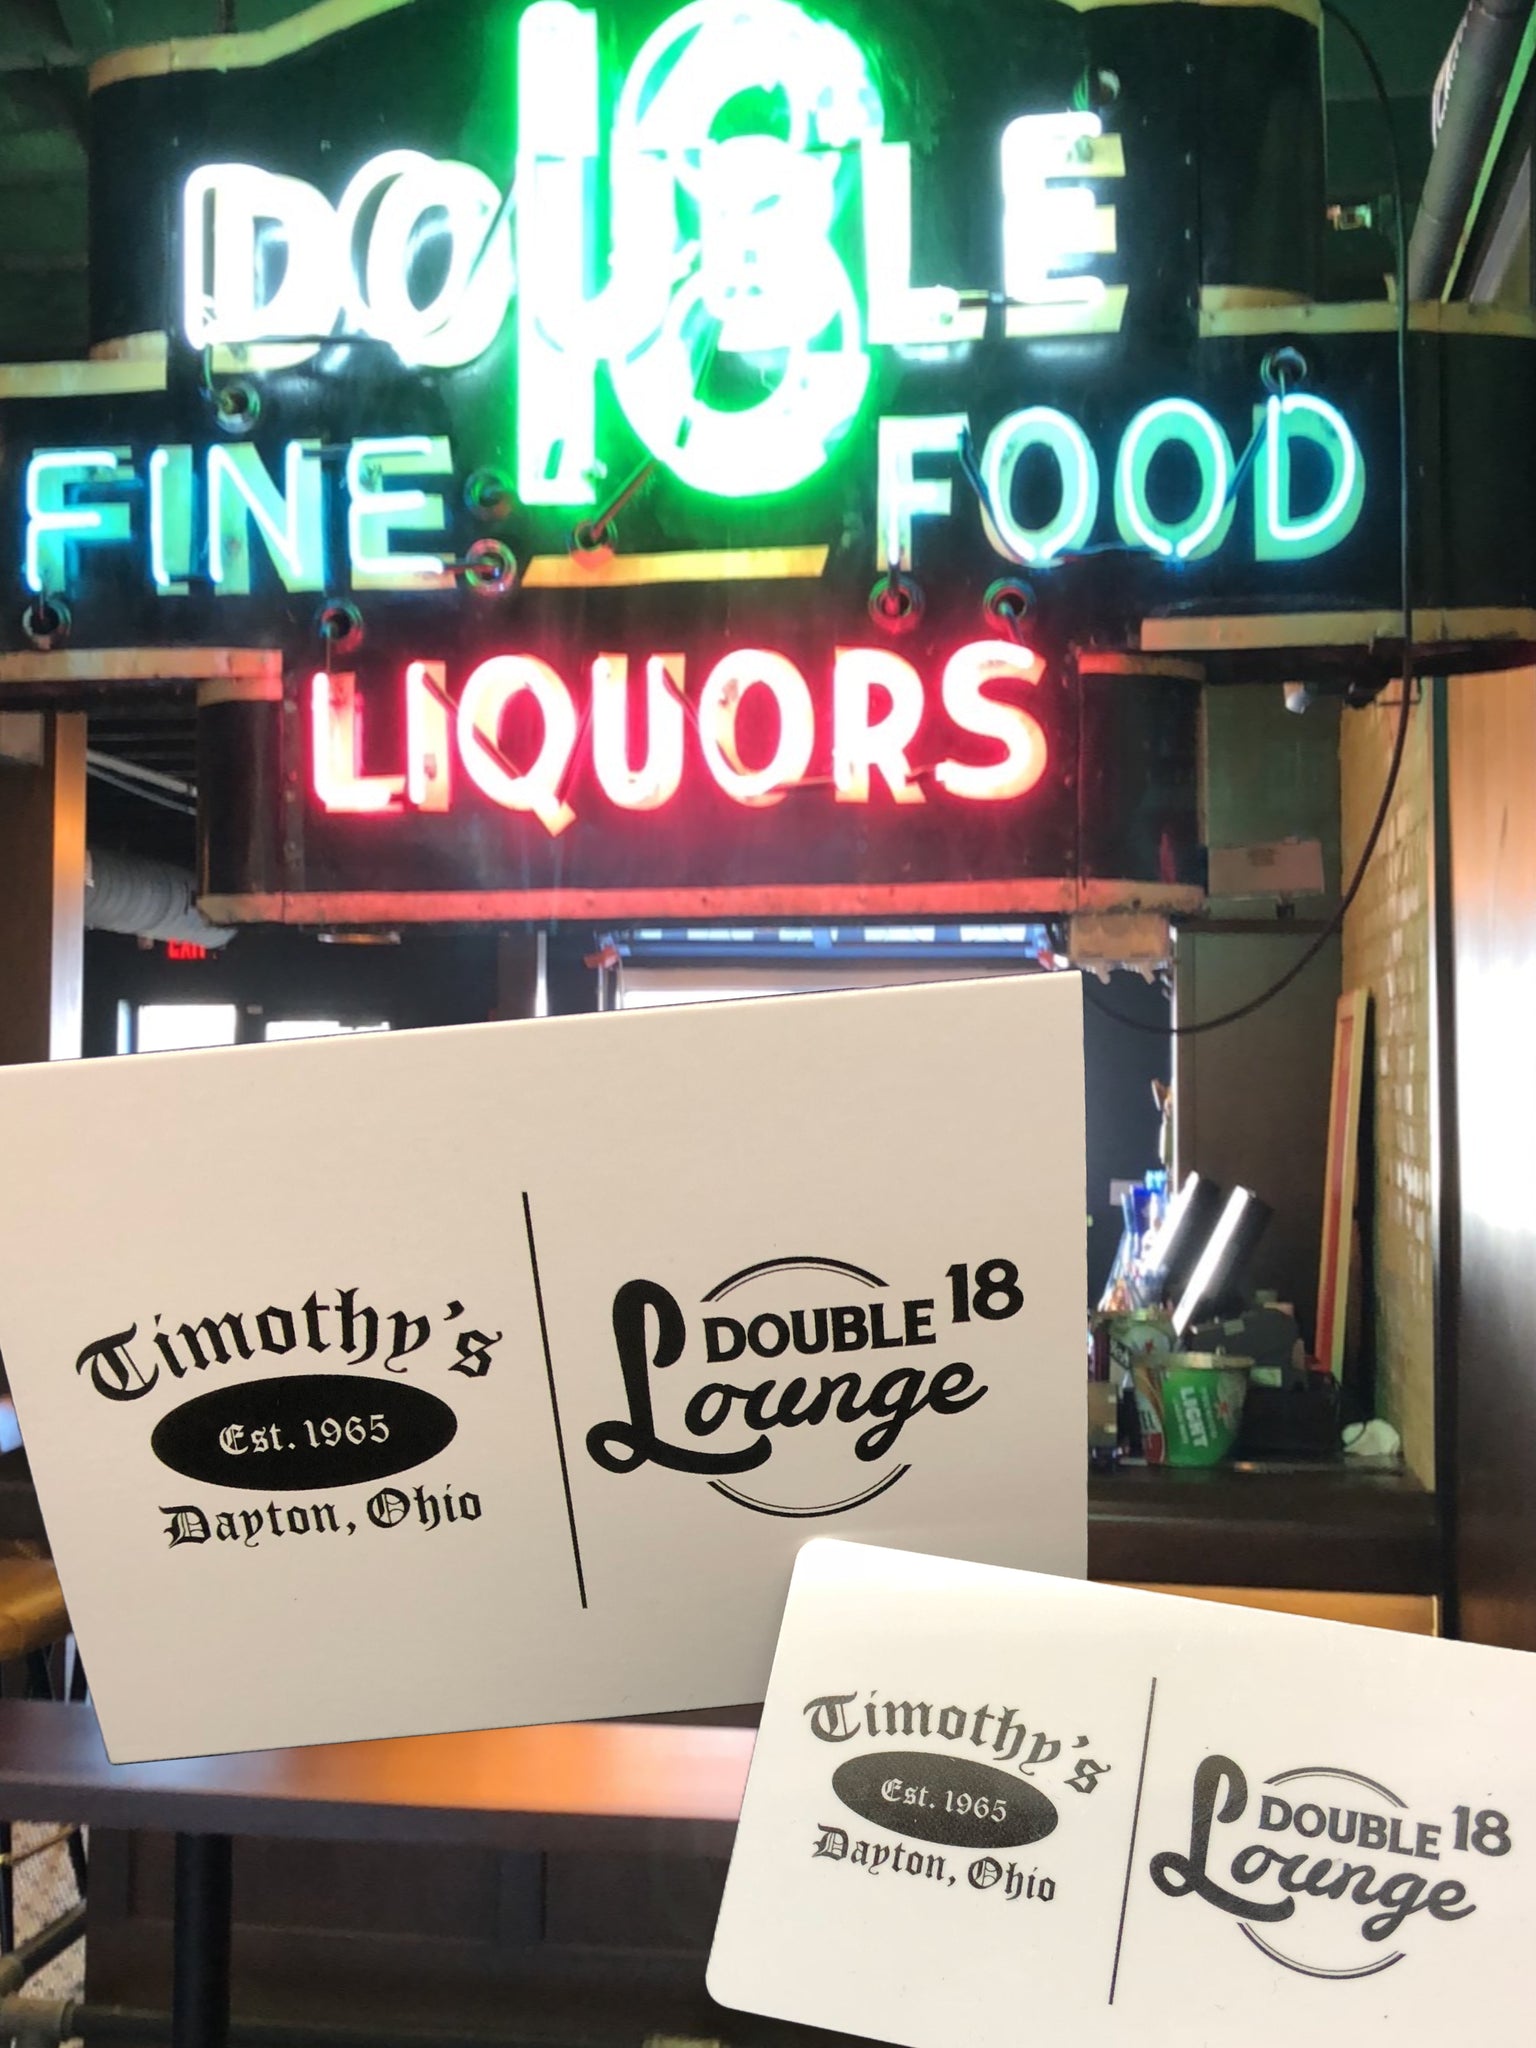 Timothy's & Double 18 Lounge Gift Card